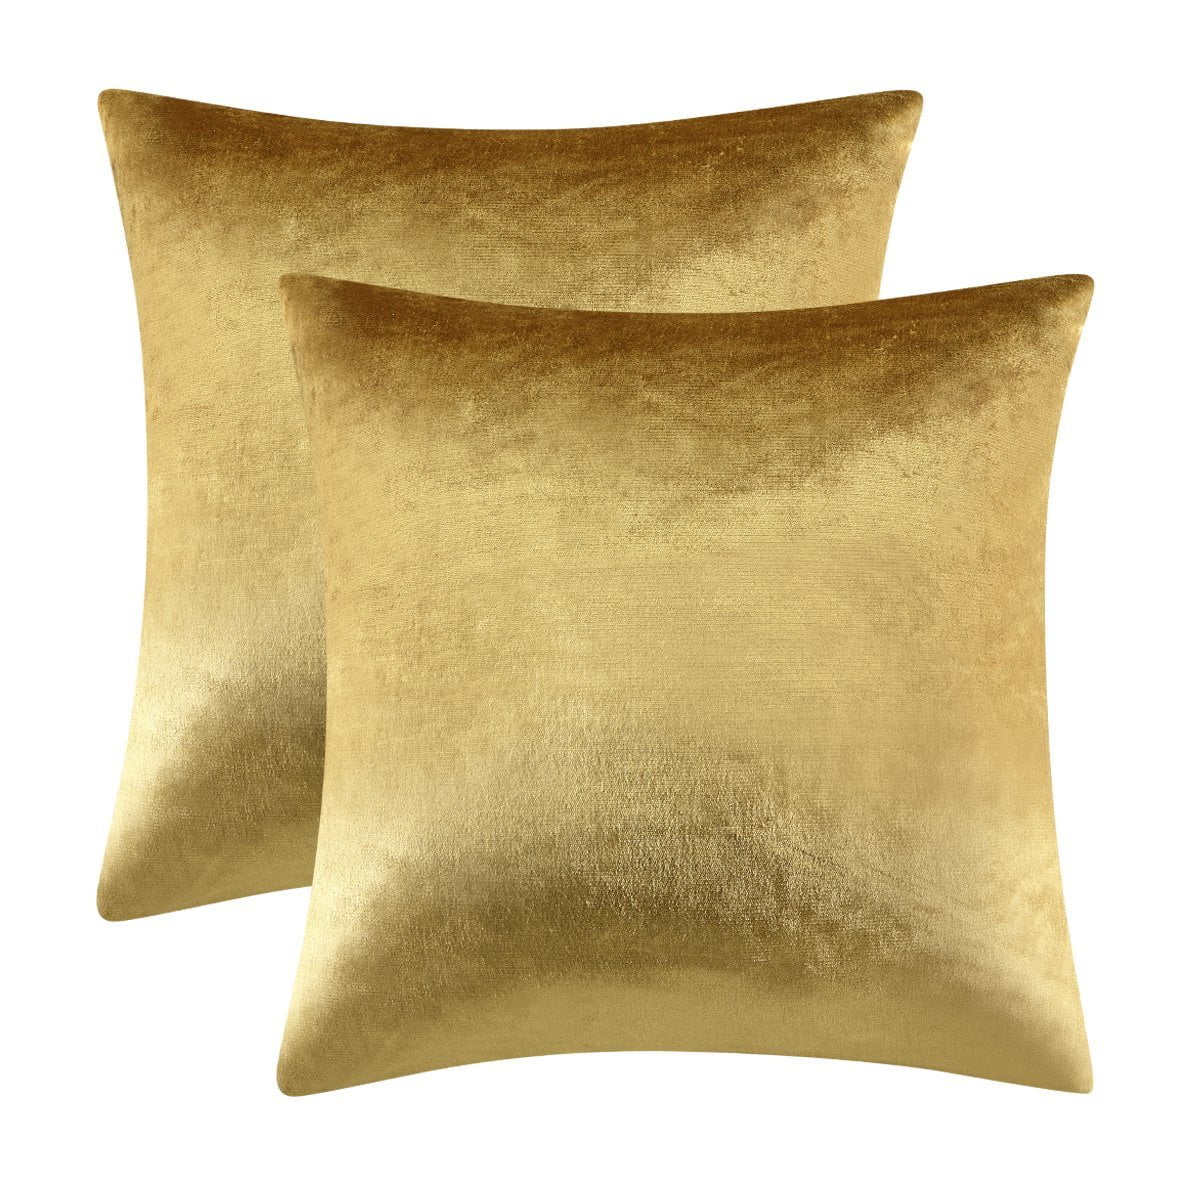 ,Gold 45 cm 2 Solid Velvet Cushion Covers Square Throw Pillow Case Covers 18x18 